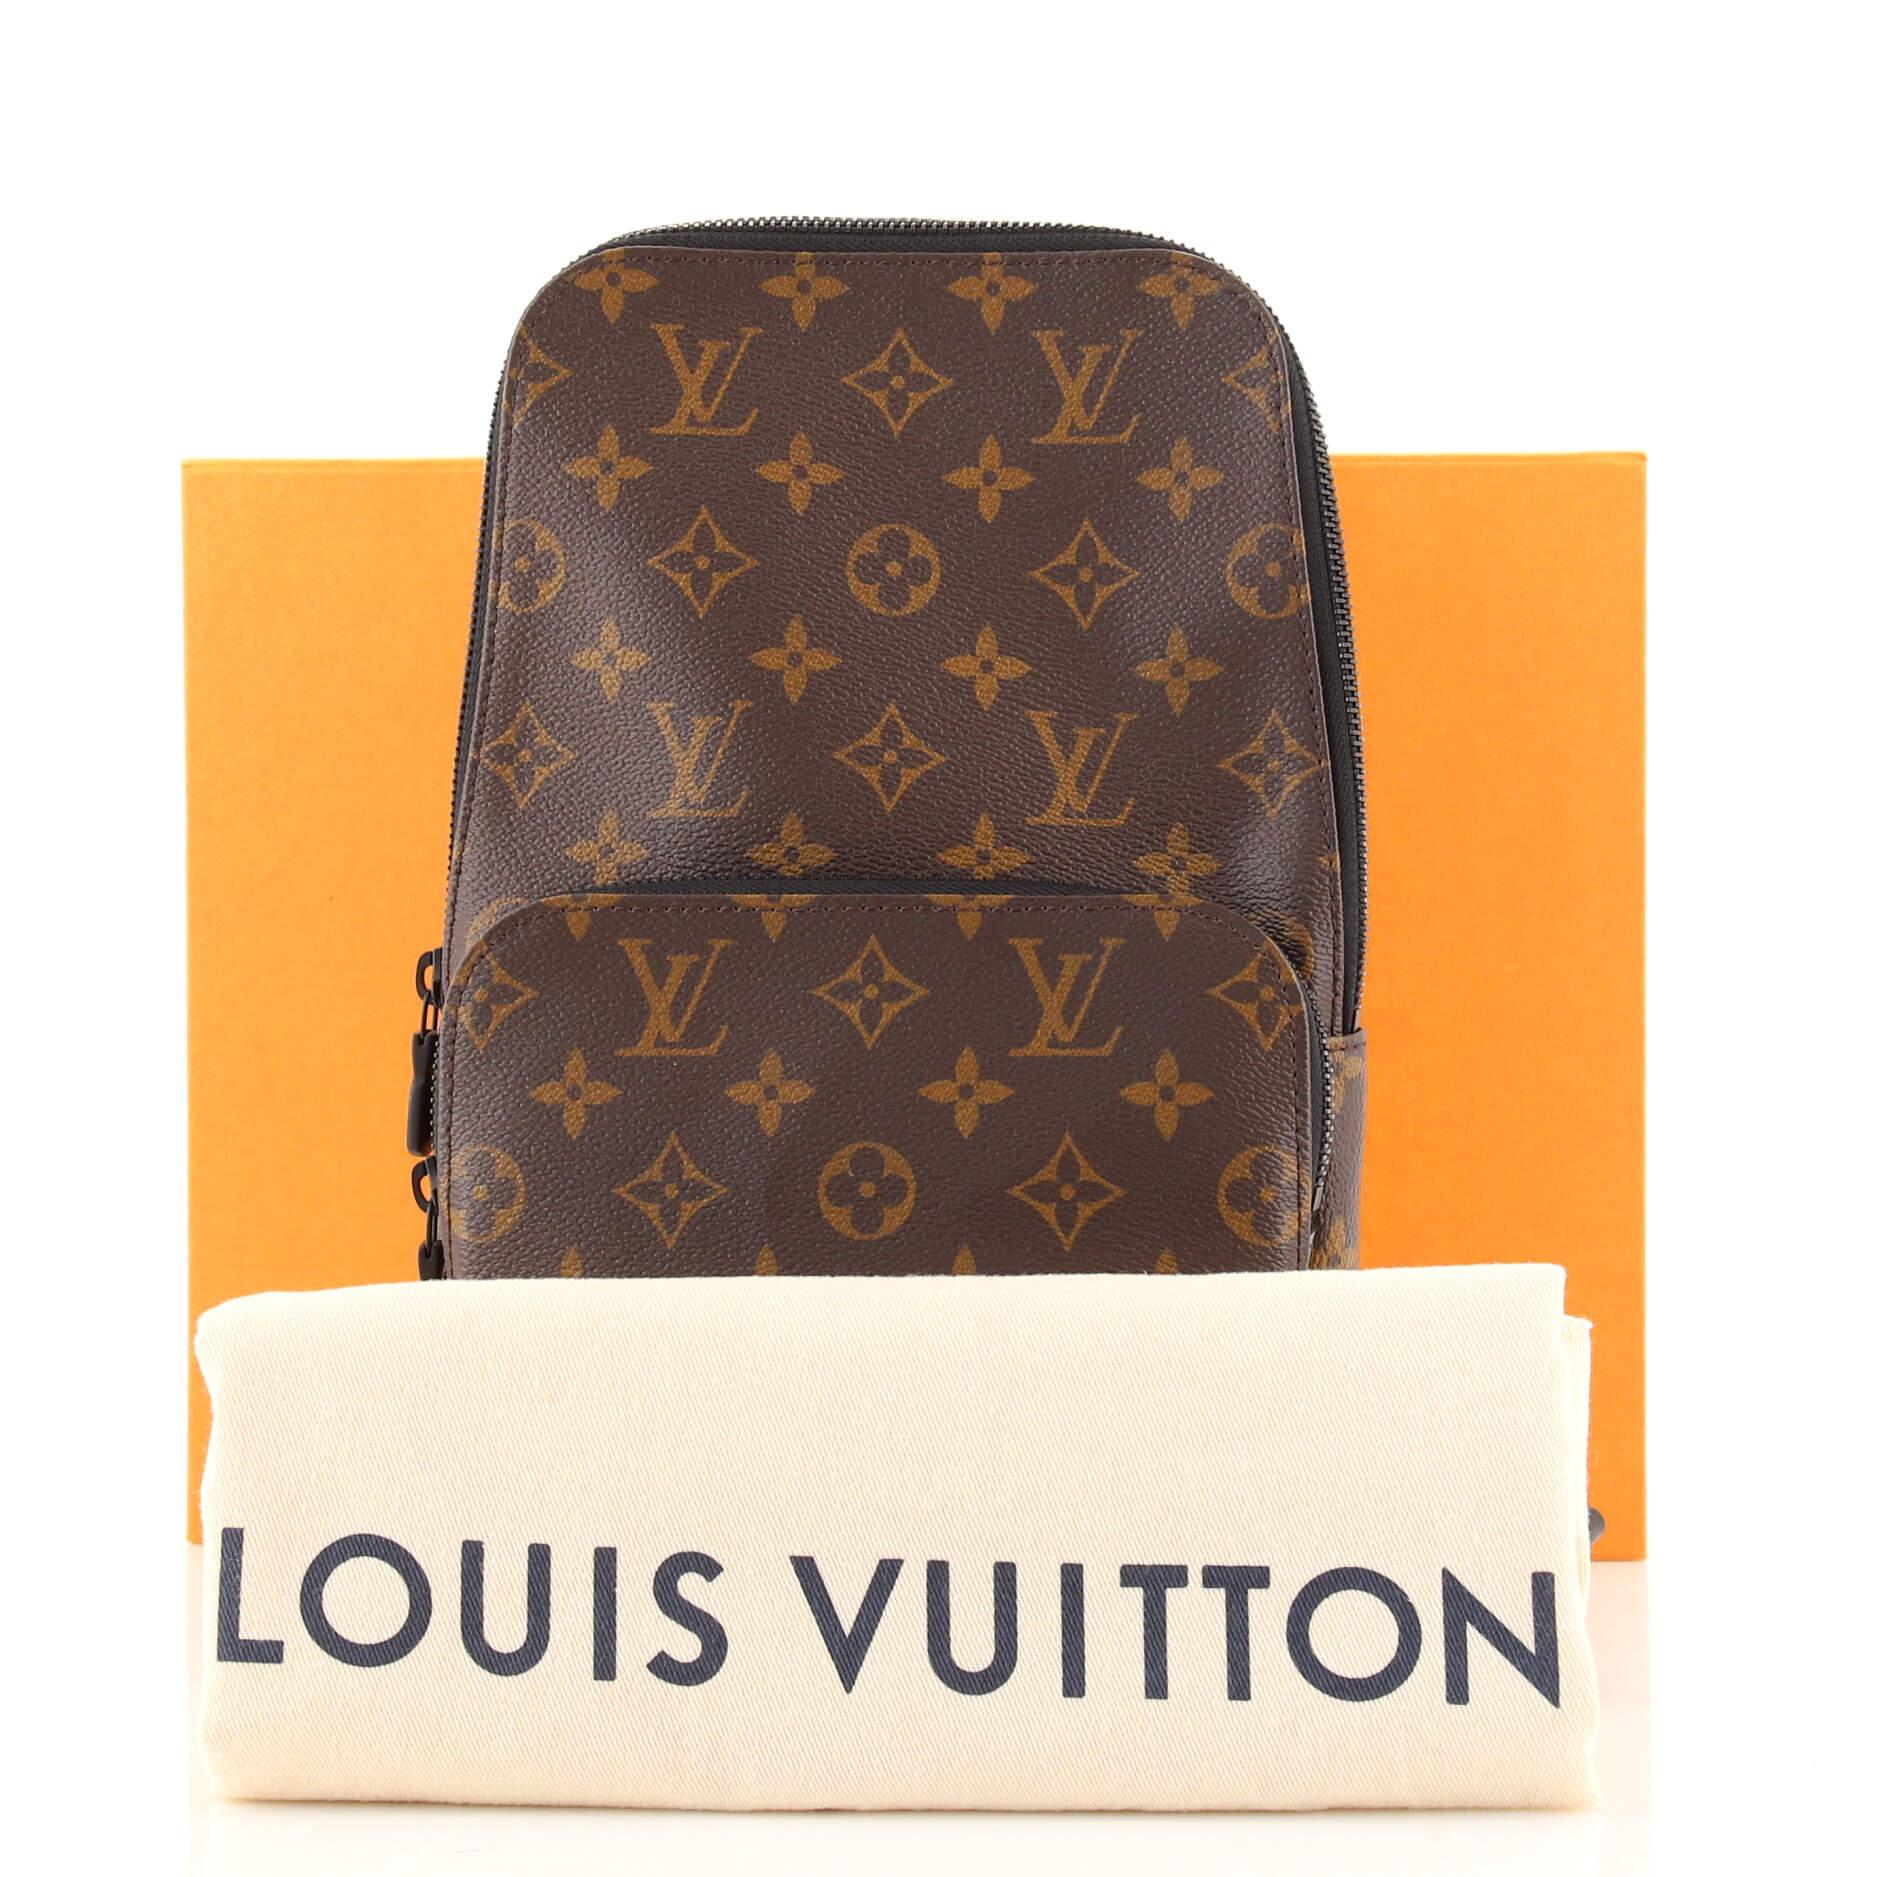 Louis Vuitton Sling Bag - 9 For Sale on 1stDibs  monogram lv sling bag, louis  vuitton sling backpack, fake louis vuitton sling bag